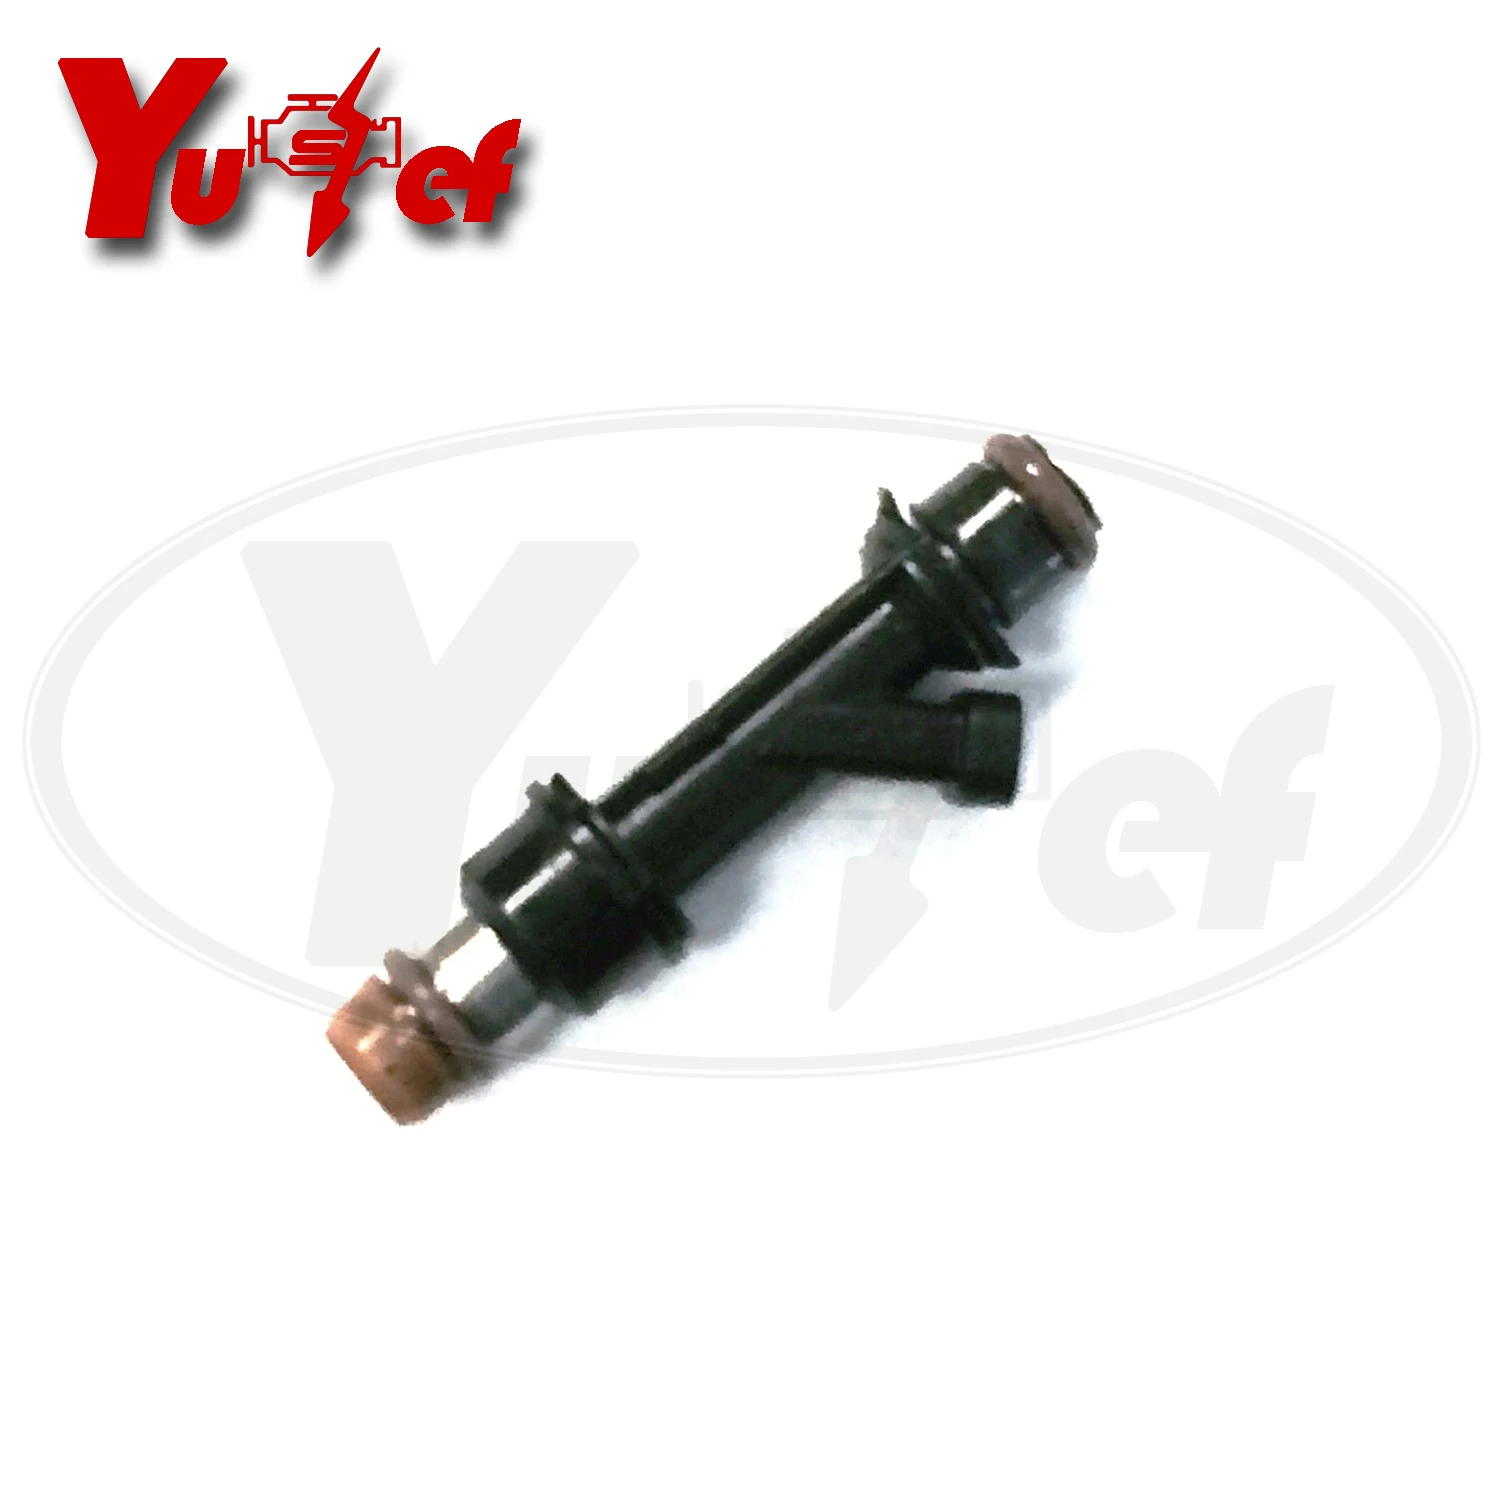 

high quality fuel injector nozzle fit for SUNFIRE 4CYL 2.2L 2003-2005 12571863